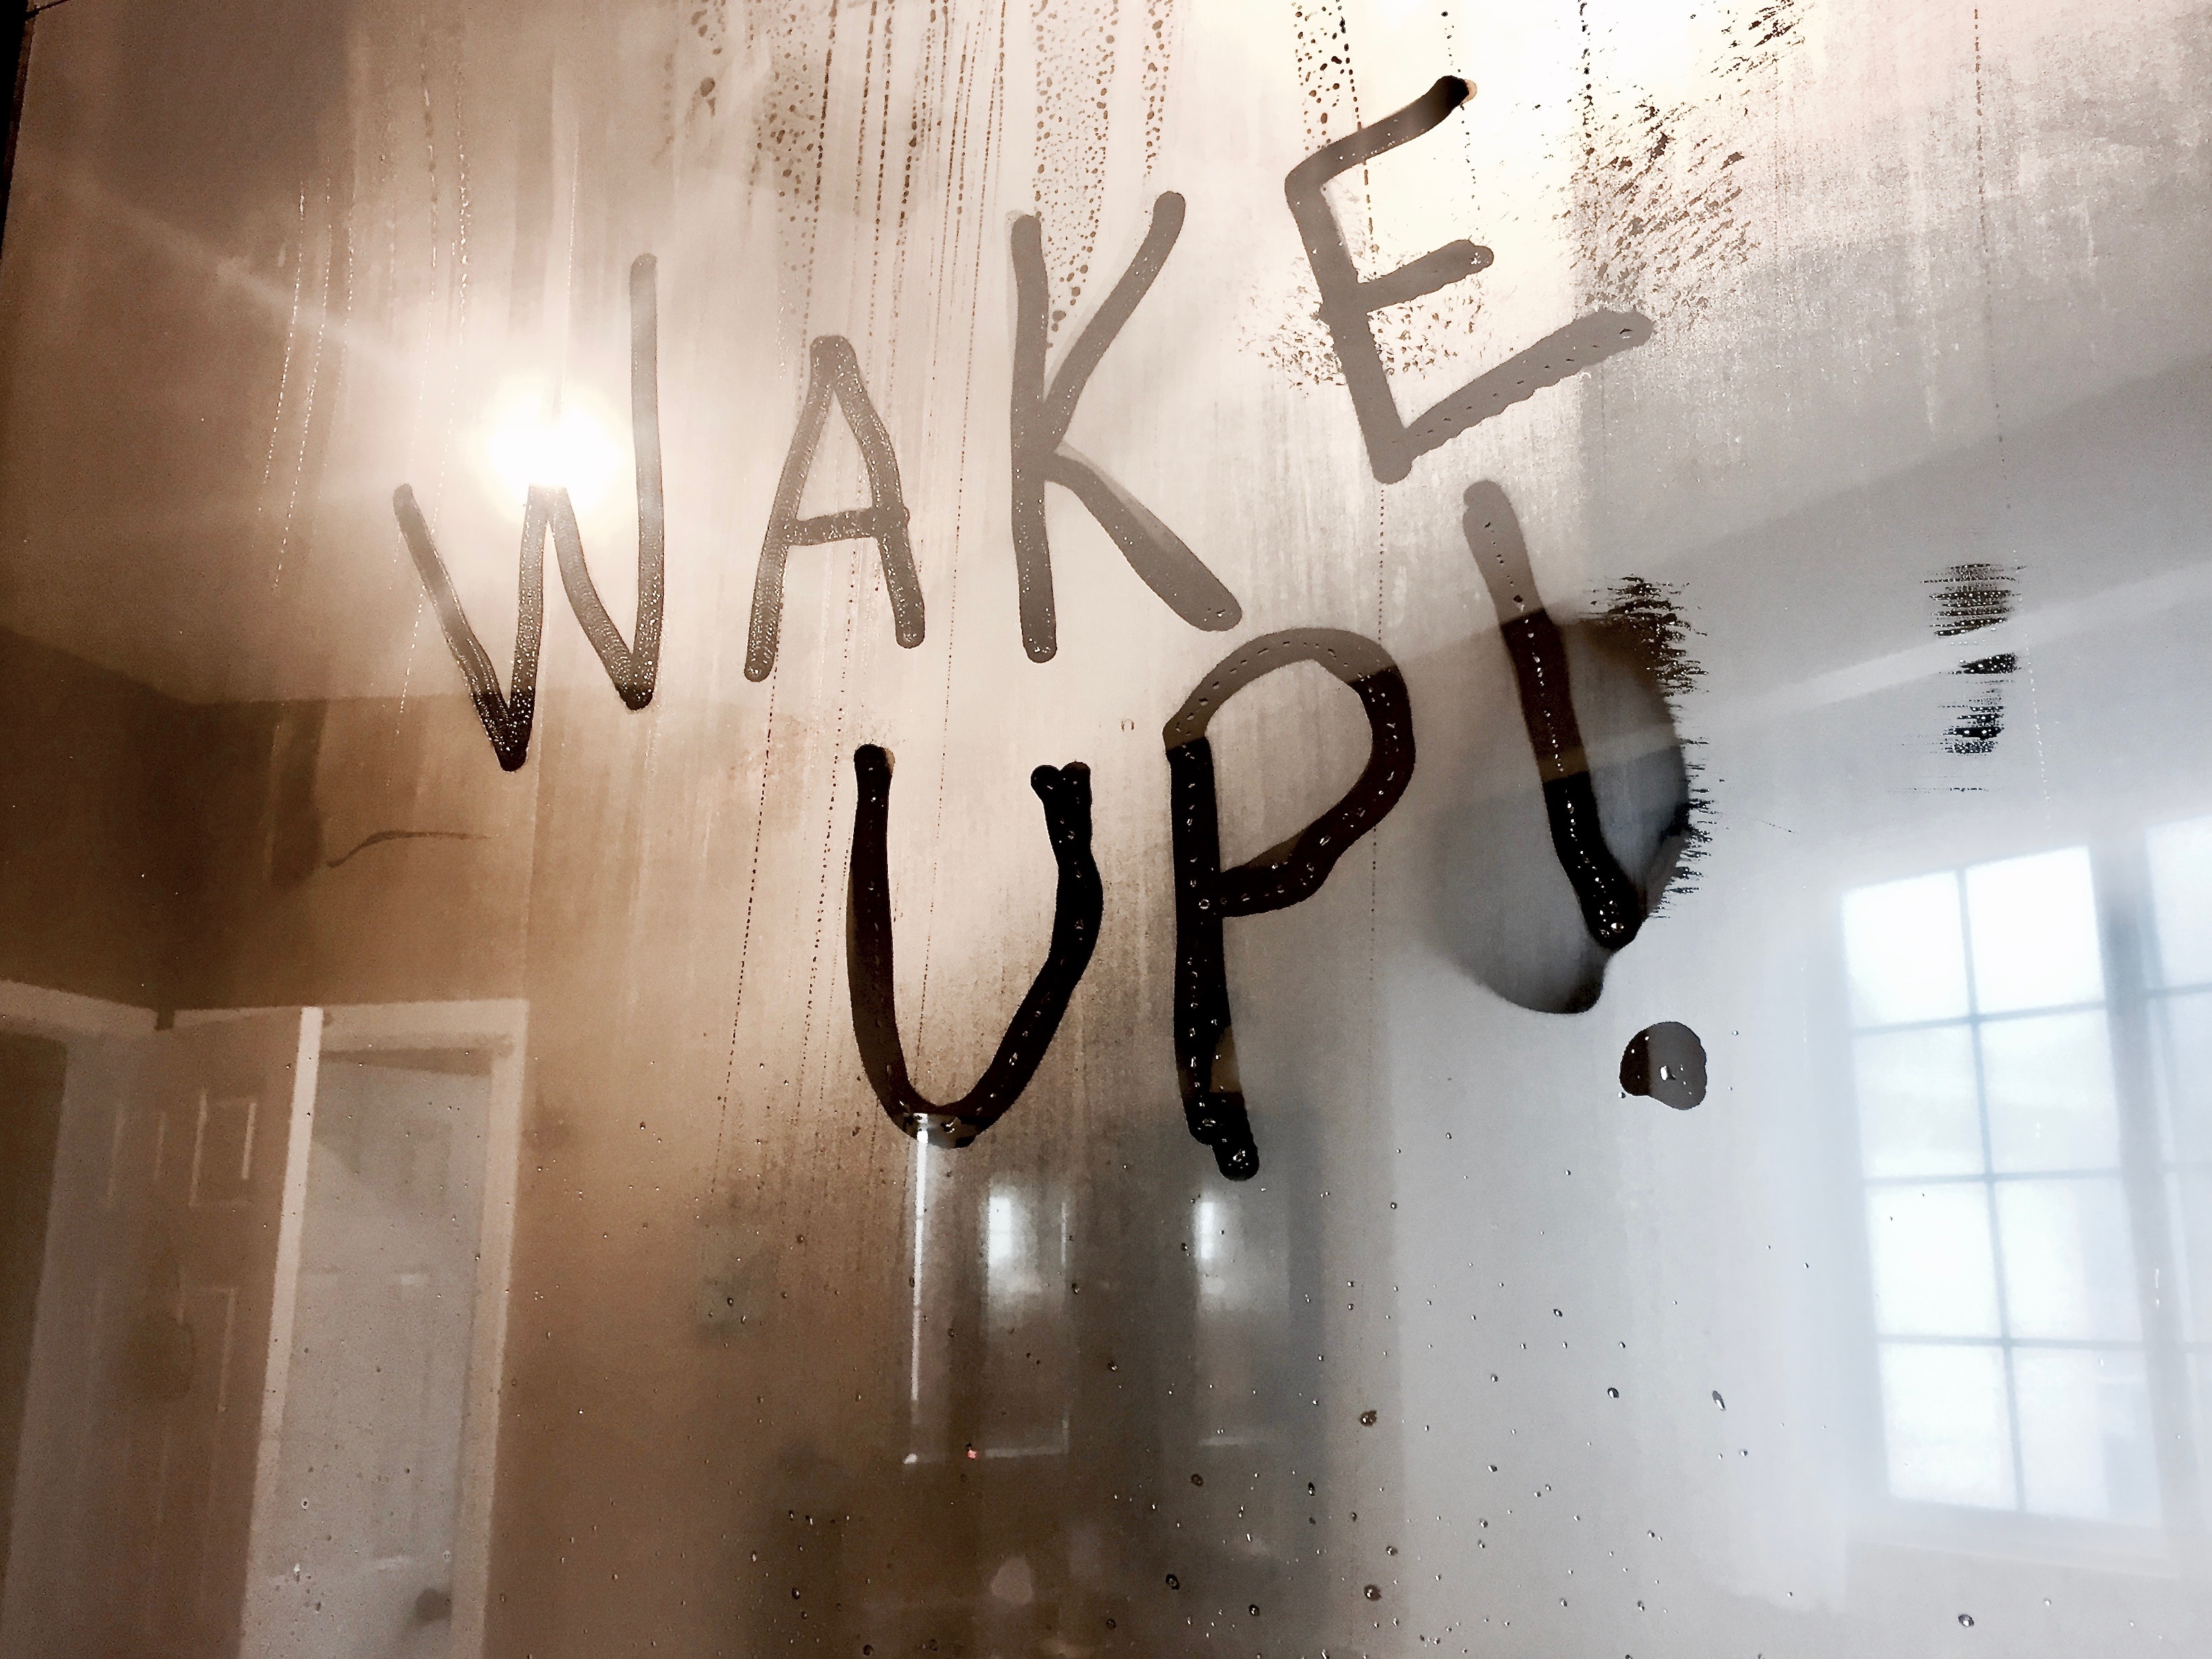 Photo of the words "Wake Up!" written on a bathroom mirror.